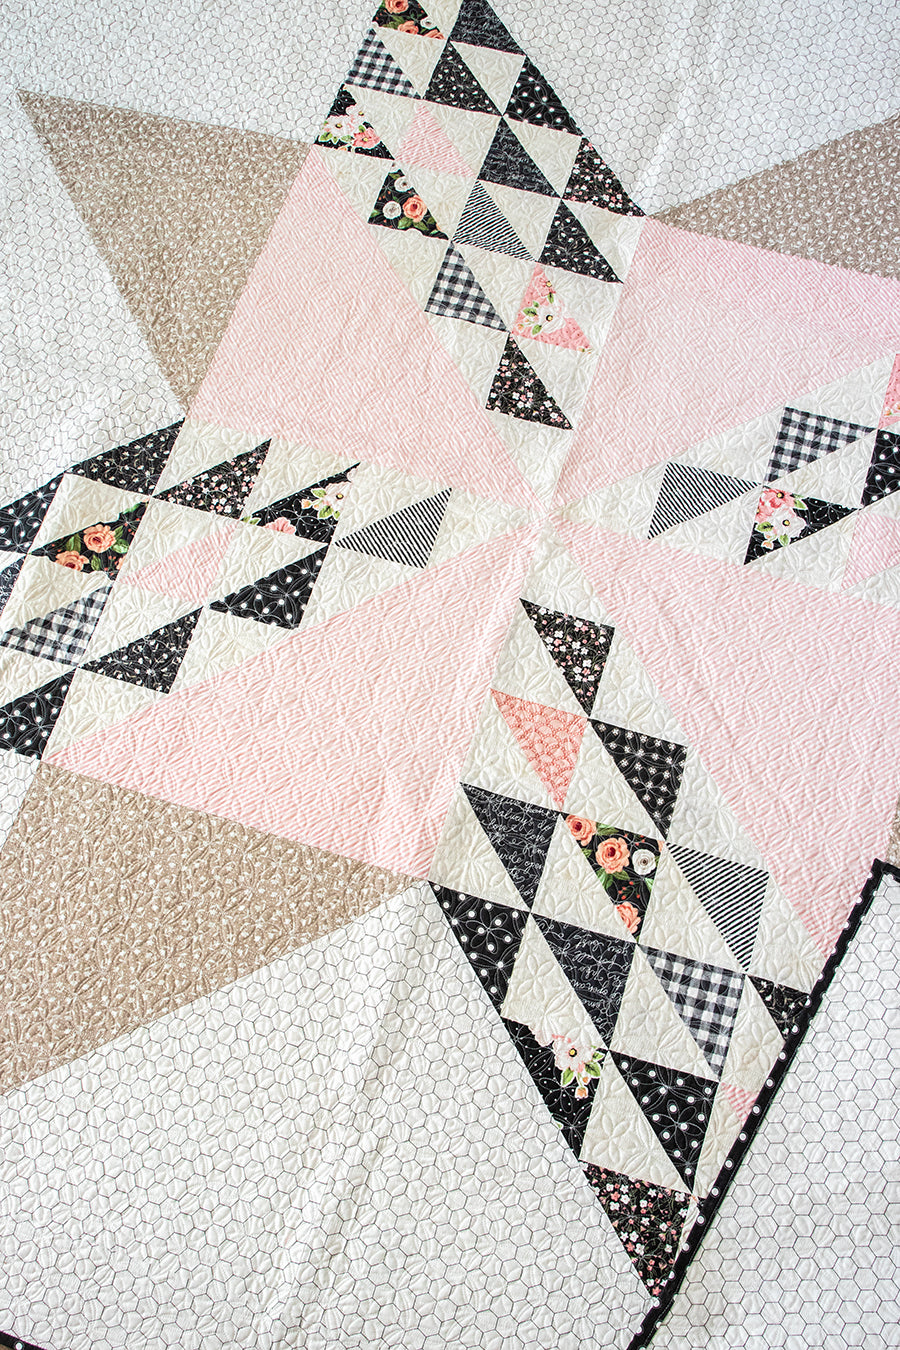 Sugar Cookie Quilt Model in Farmer's Daughter Fabric